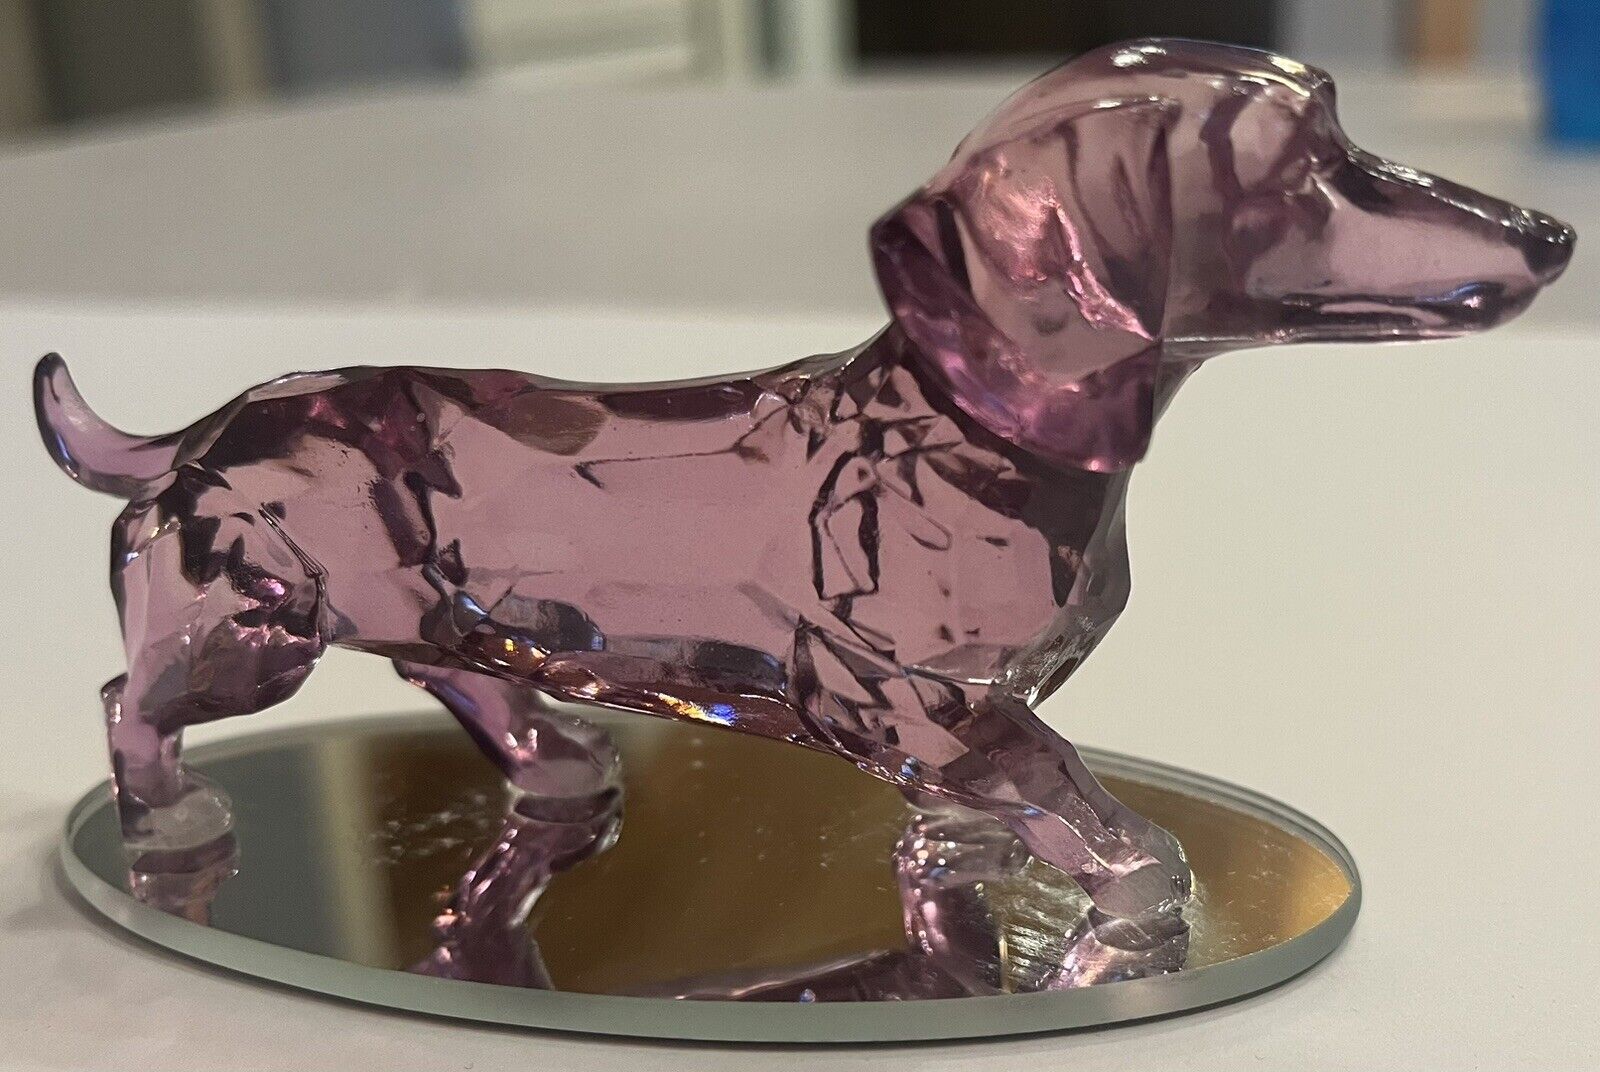 Rarest Gem Dachshunds of The World “Radiance Of The Amethyst” Collection